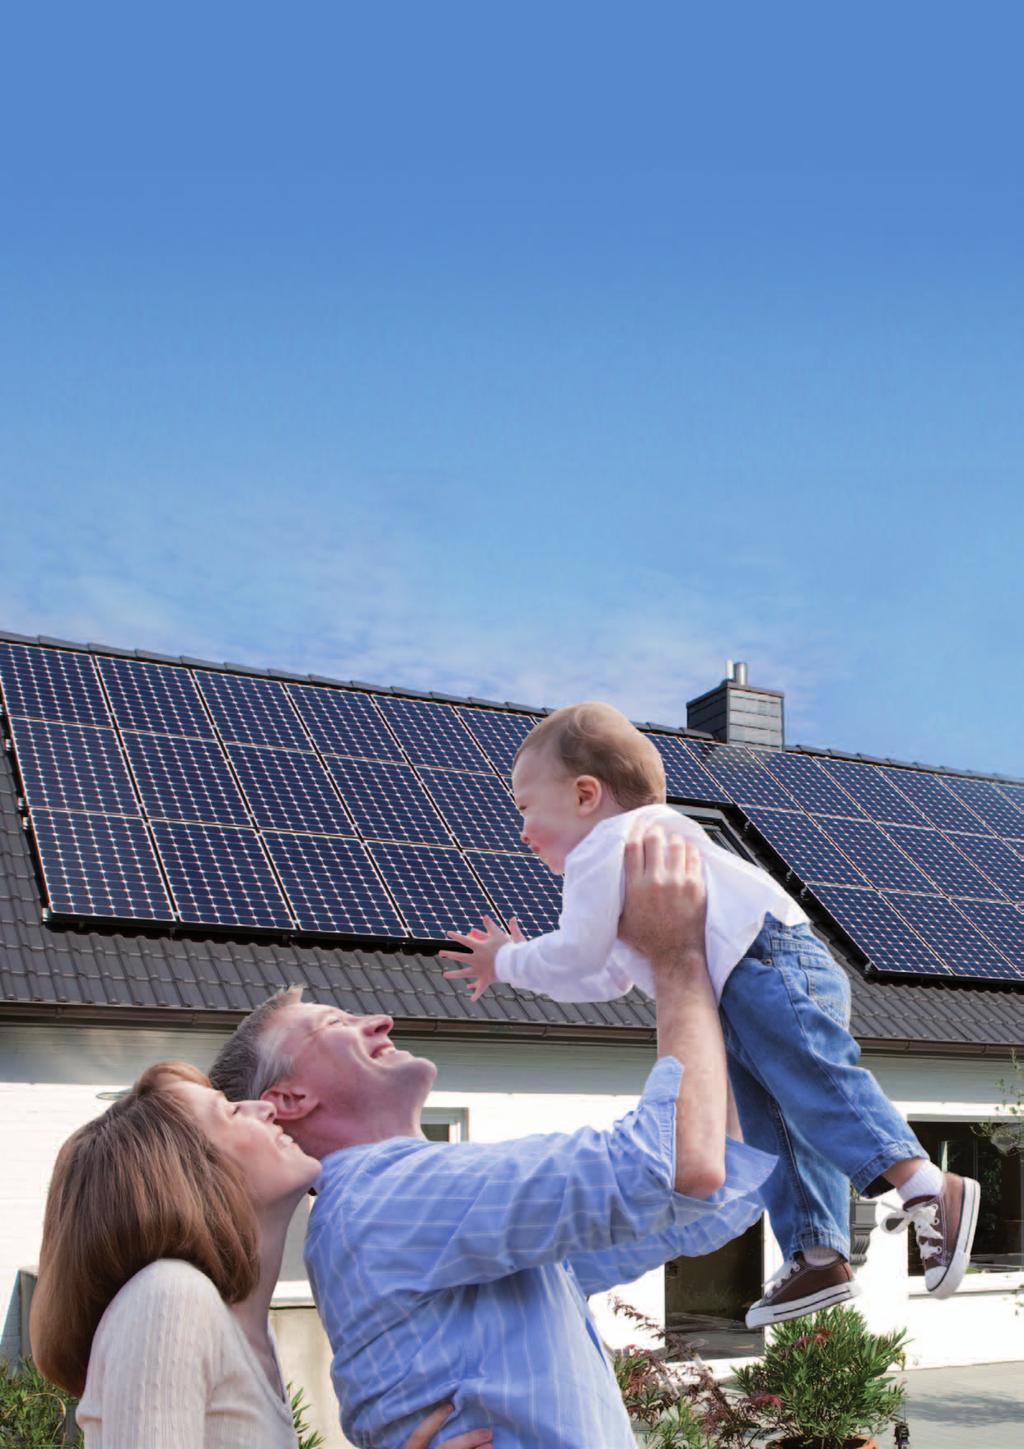 SunPower technology delivers more energy More power installed on your roof SunPower high-efficiency solar technology is the best choice for space-constrained rooftops, given its higher energy